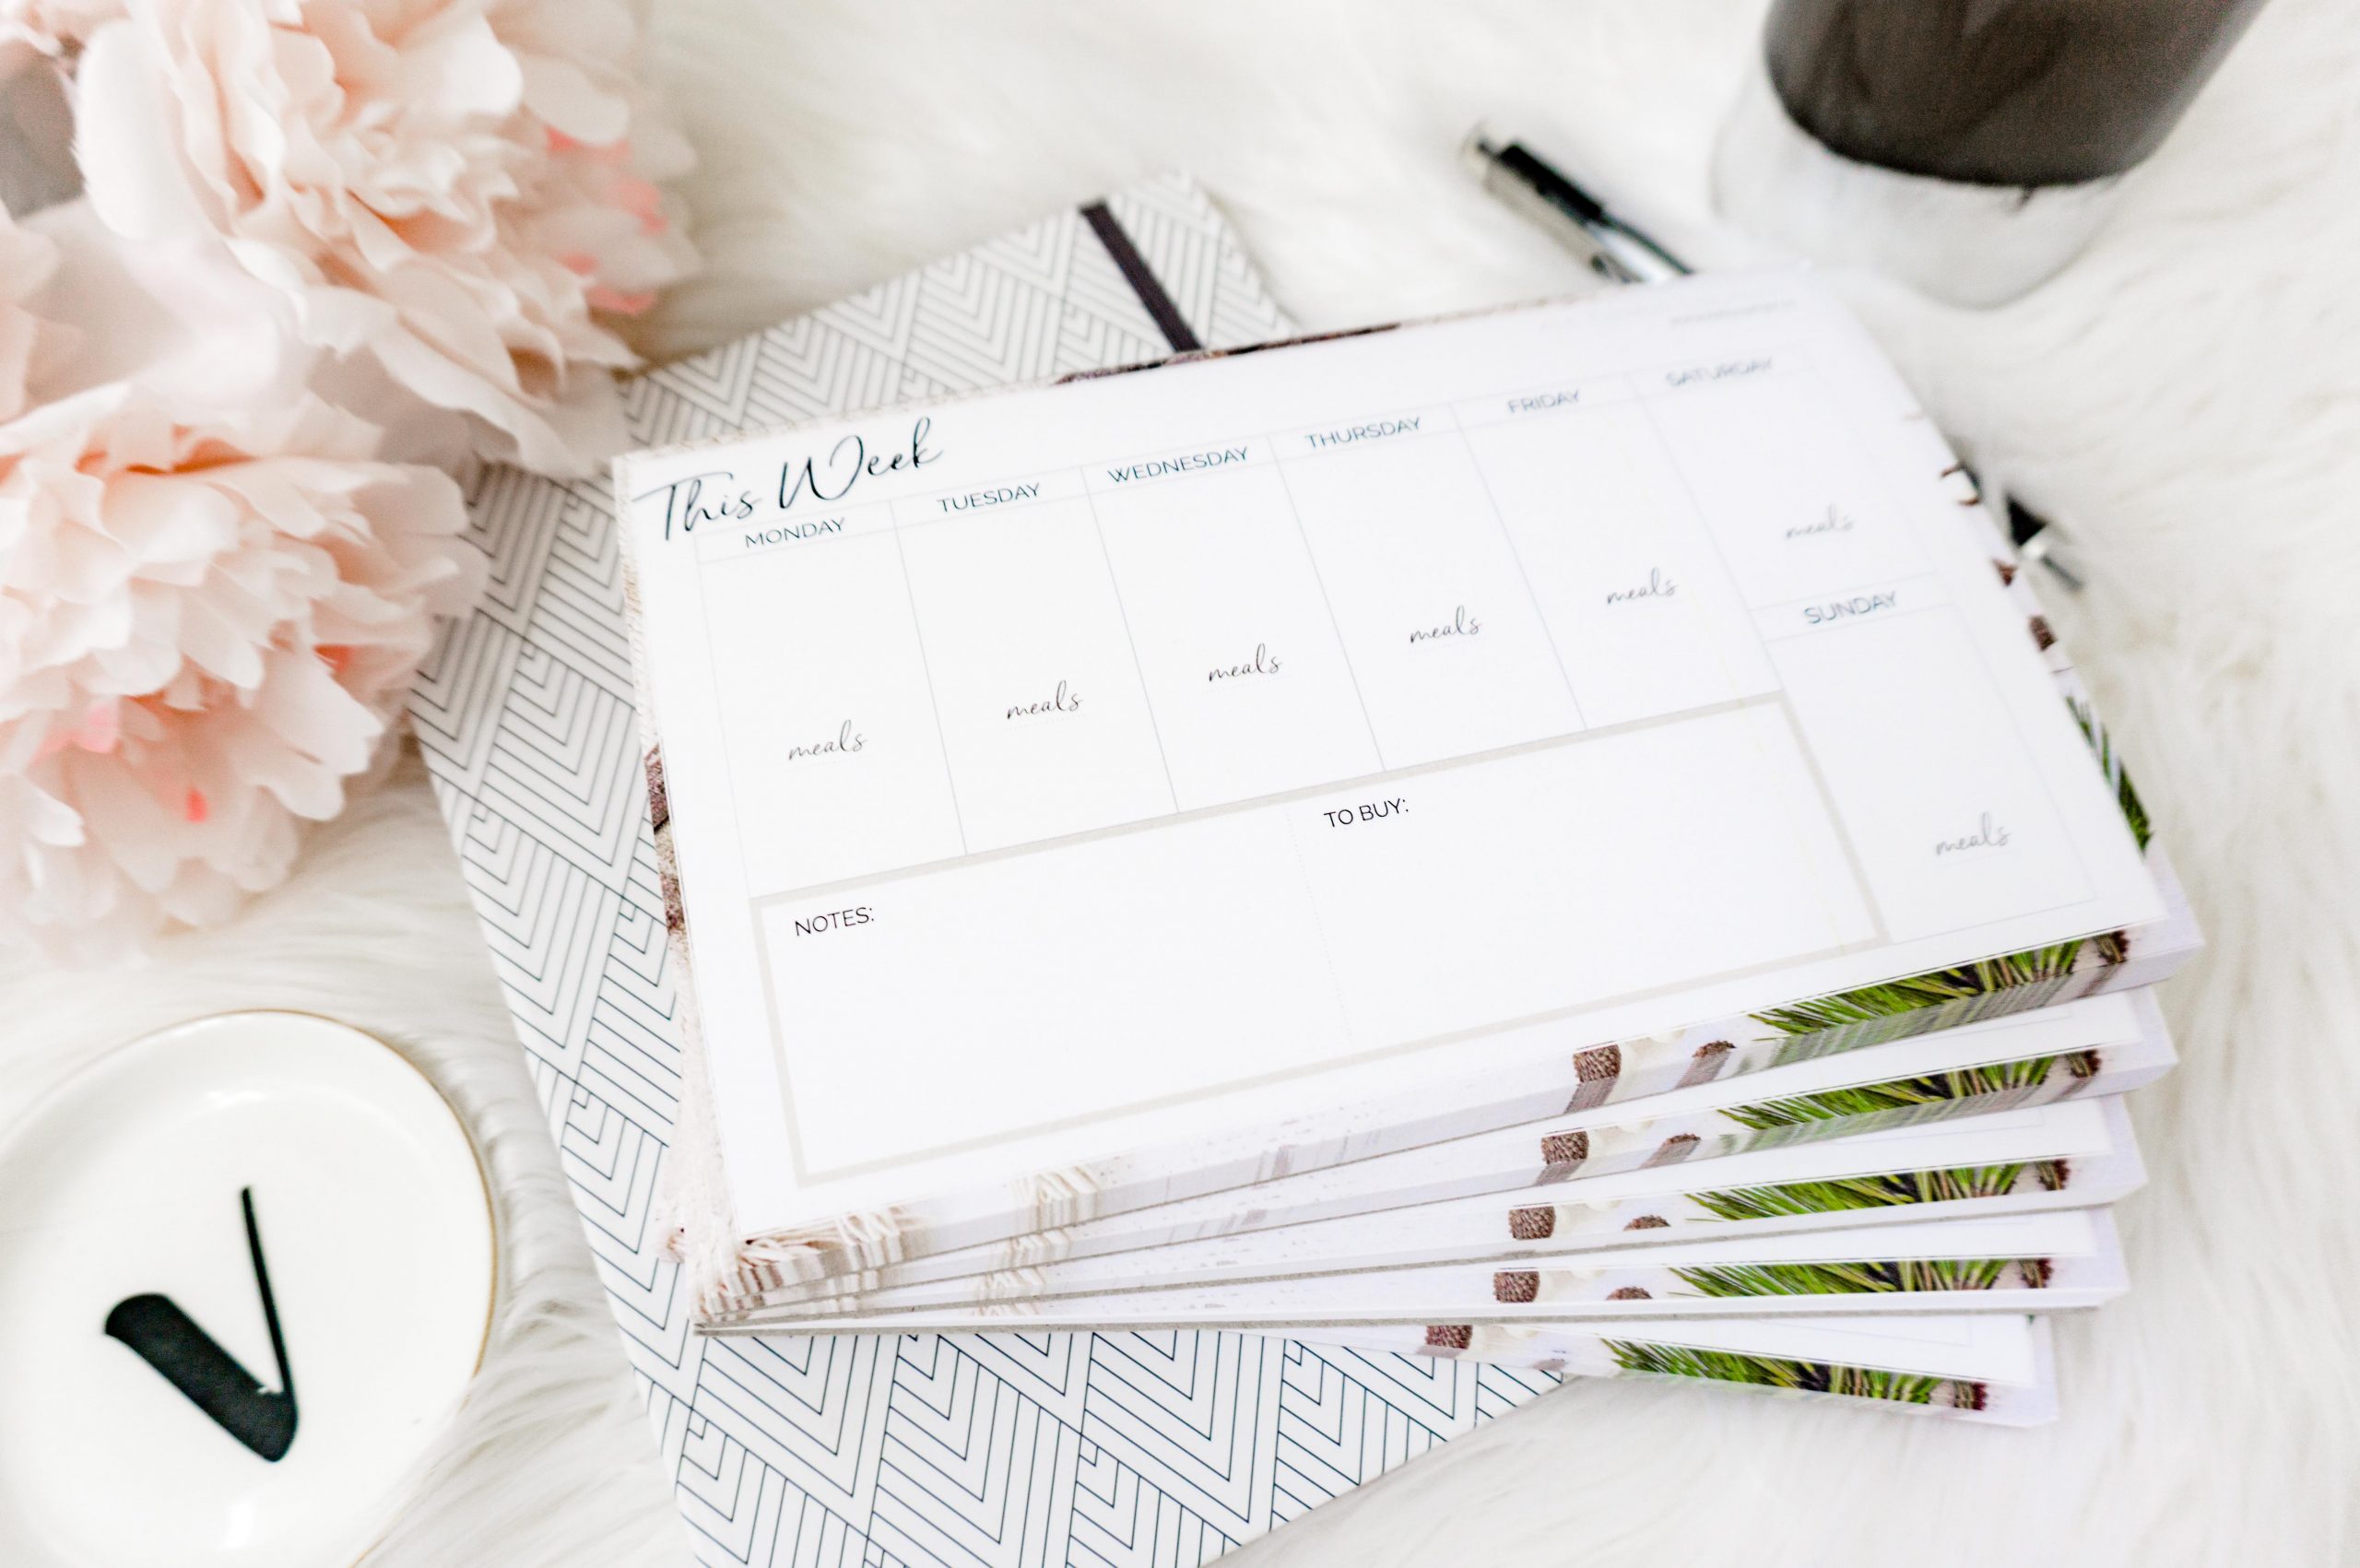 STAYING ORGANIZED: WEEKLY PLANNING